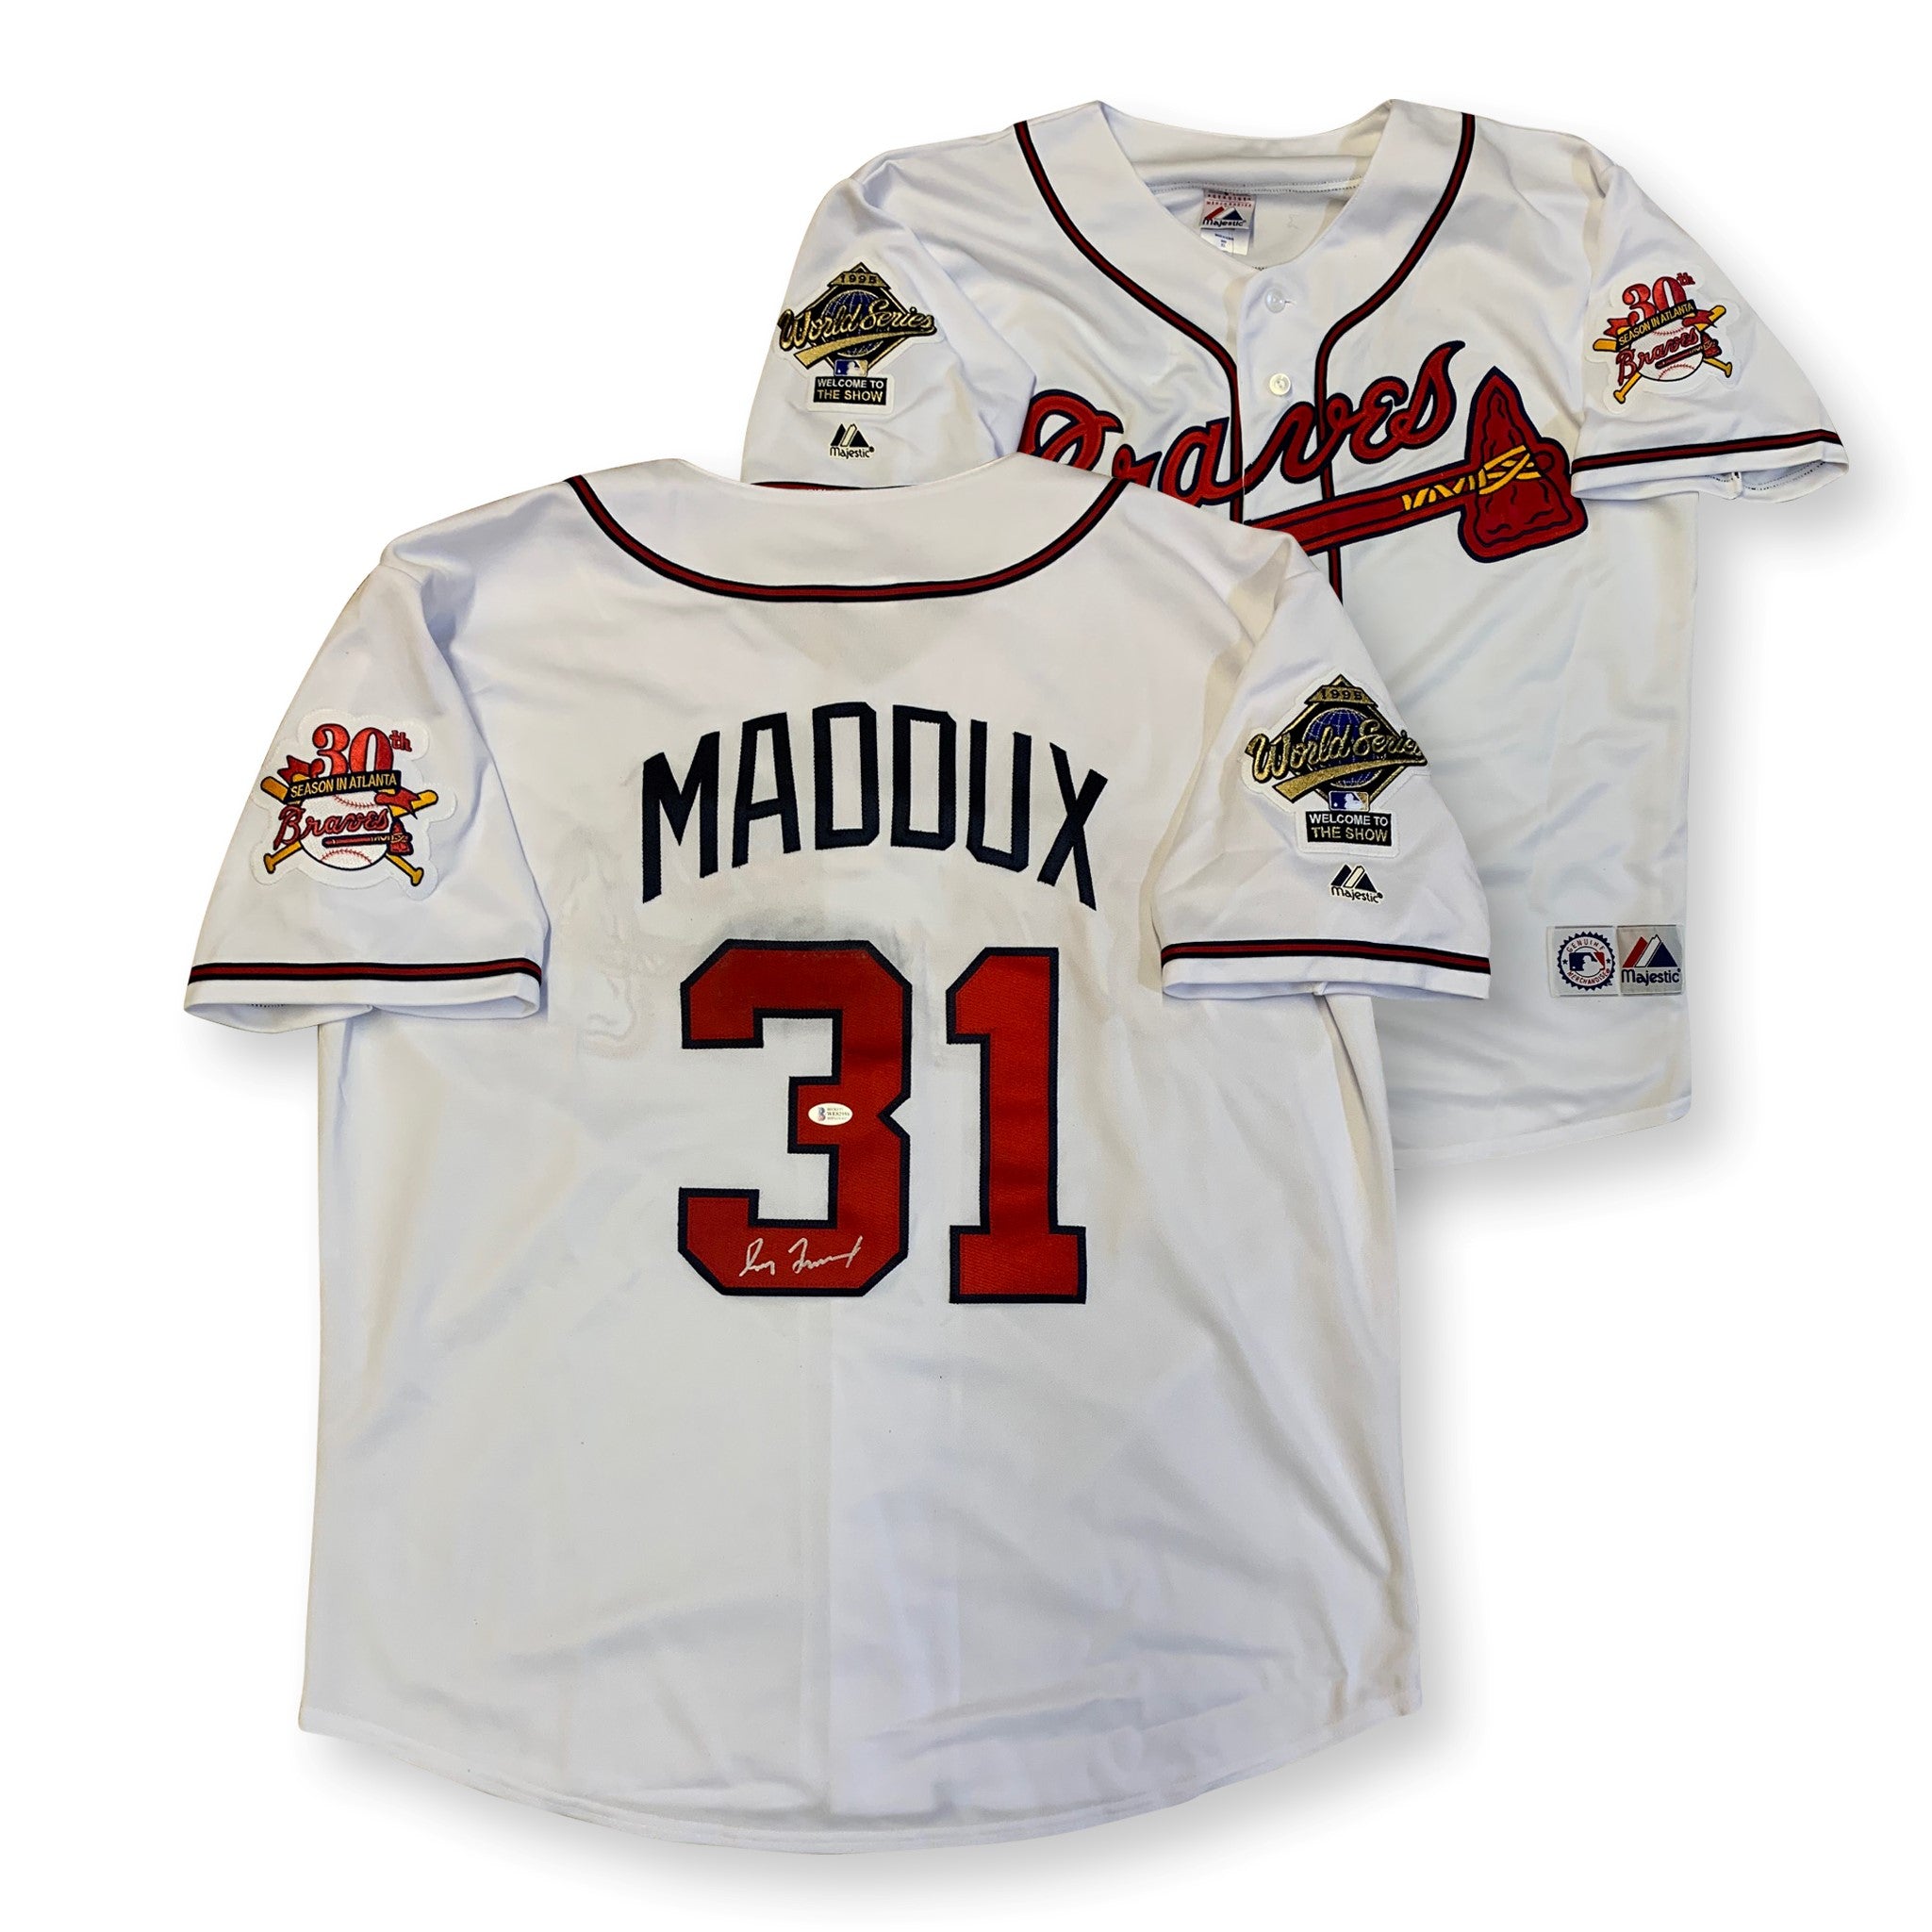 he Legacy of #31 Celebrating Greg Maddux and His Atlanta Braves Jersey